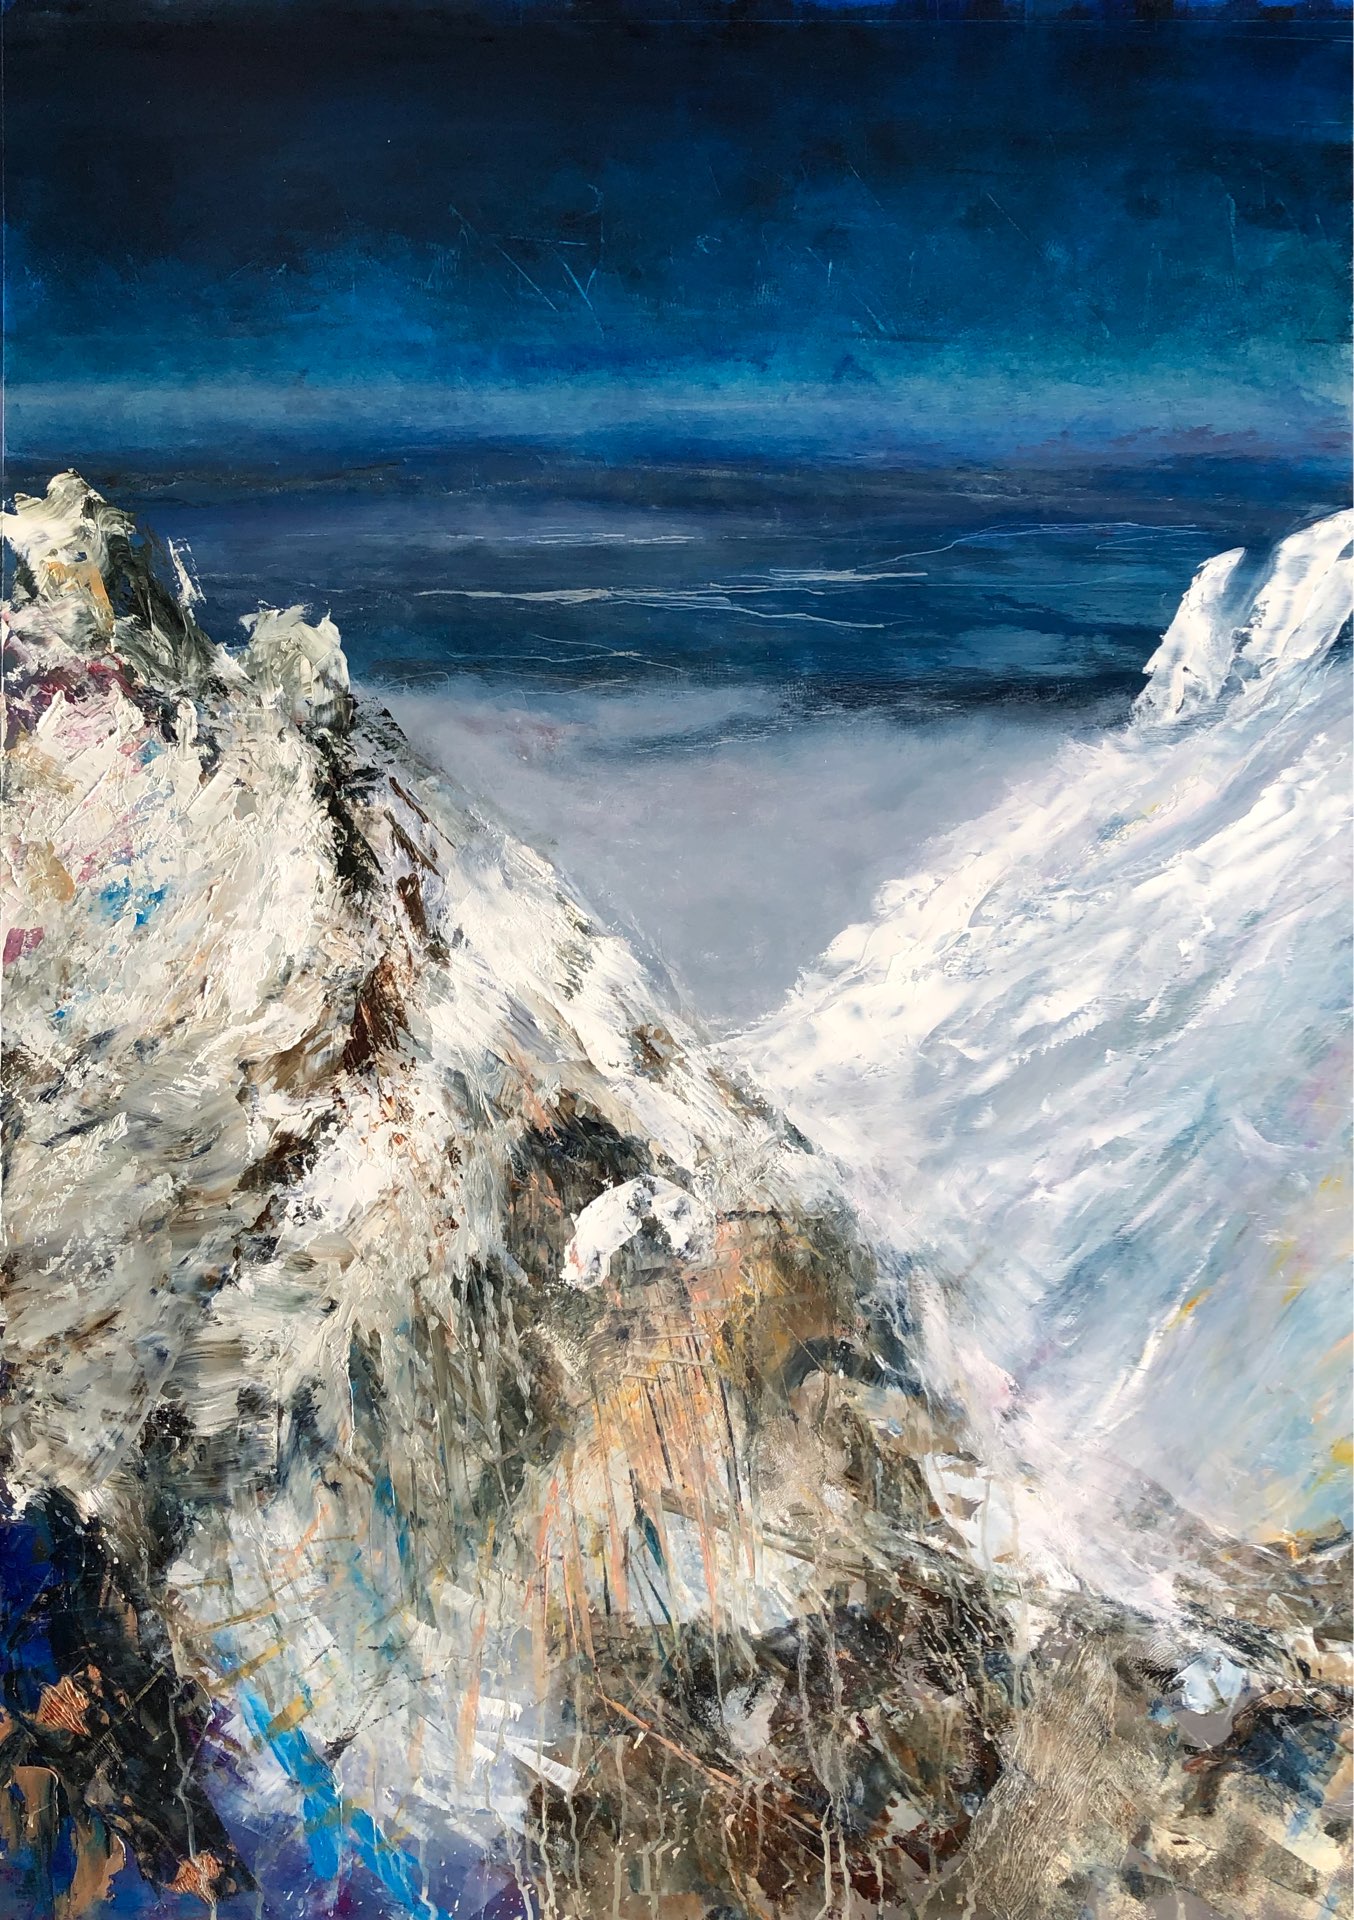 Grandeur, View from 14,180’, Contemporary oil painting on metal of a mountain peak with clouds below, Fine Art by Cynthia McLoughlin